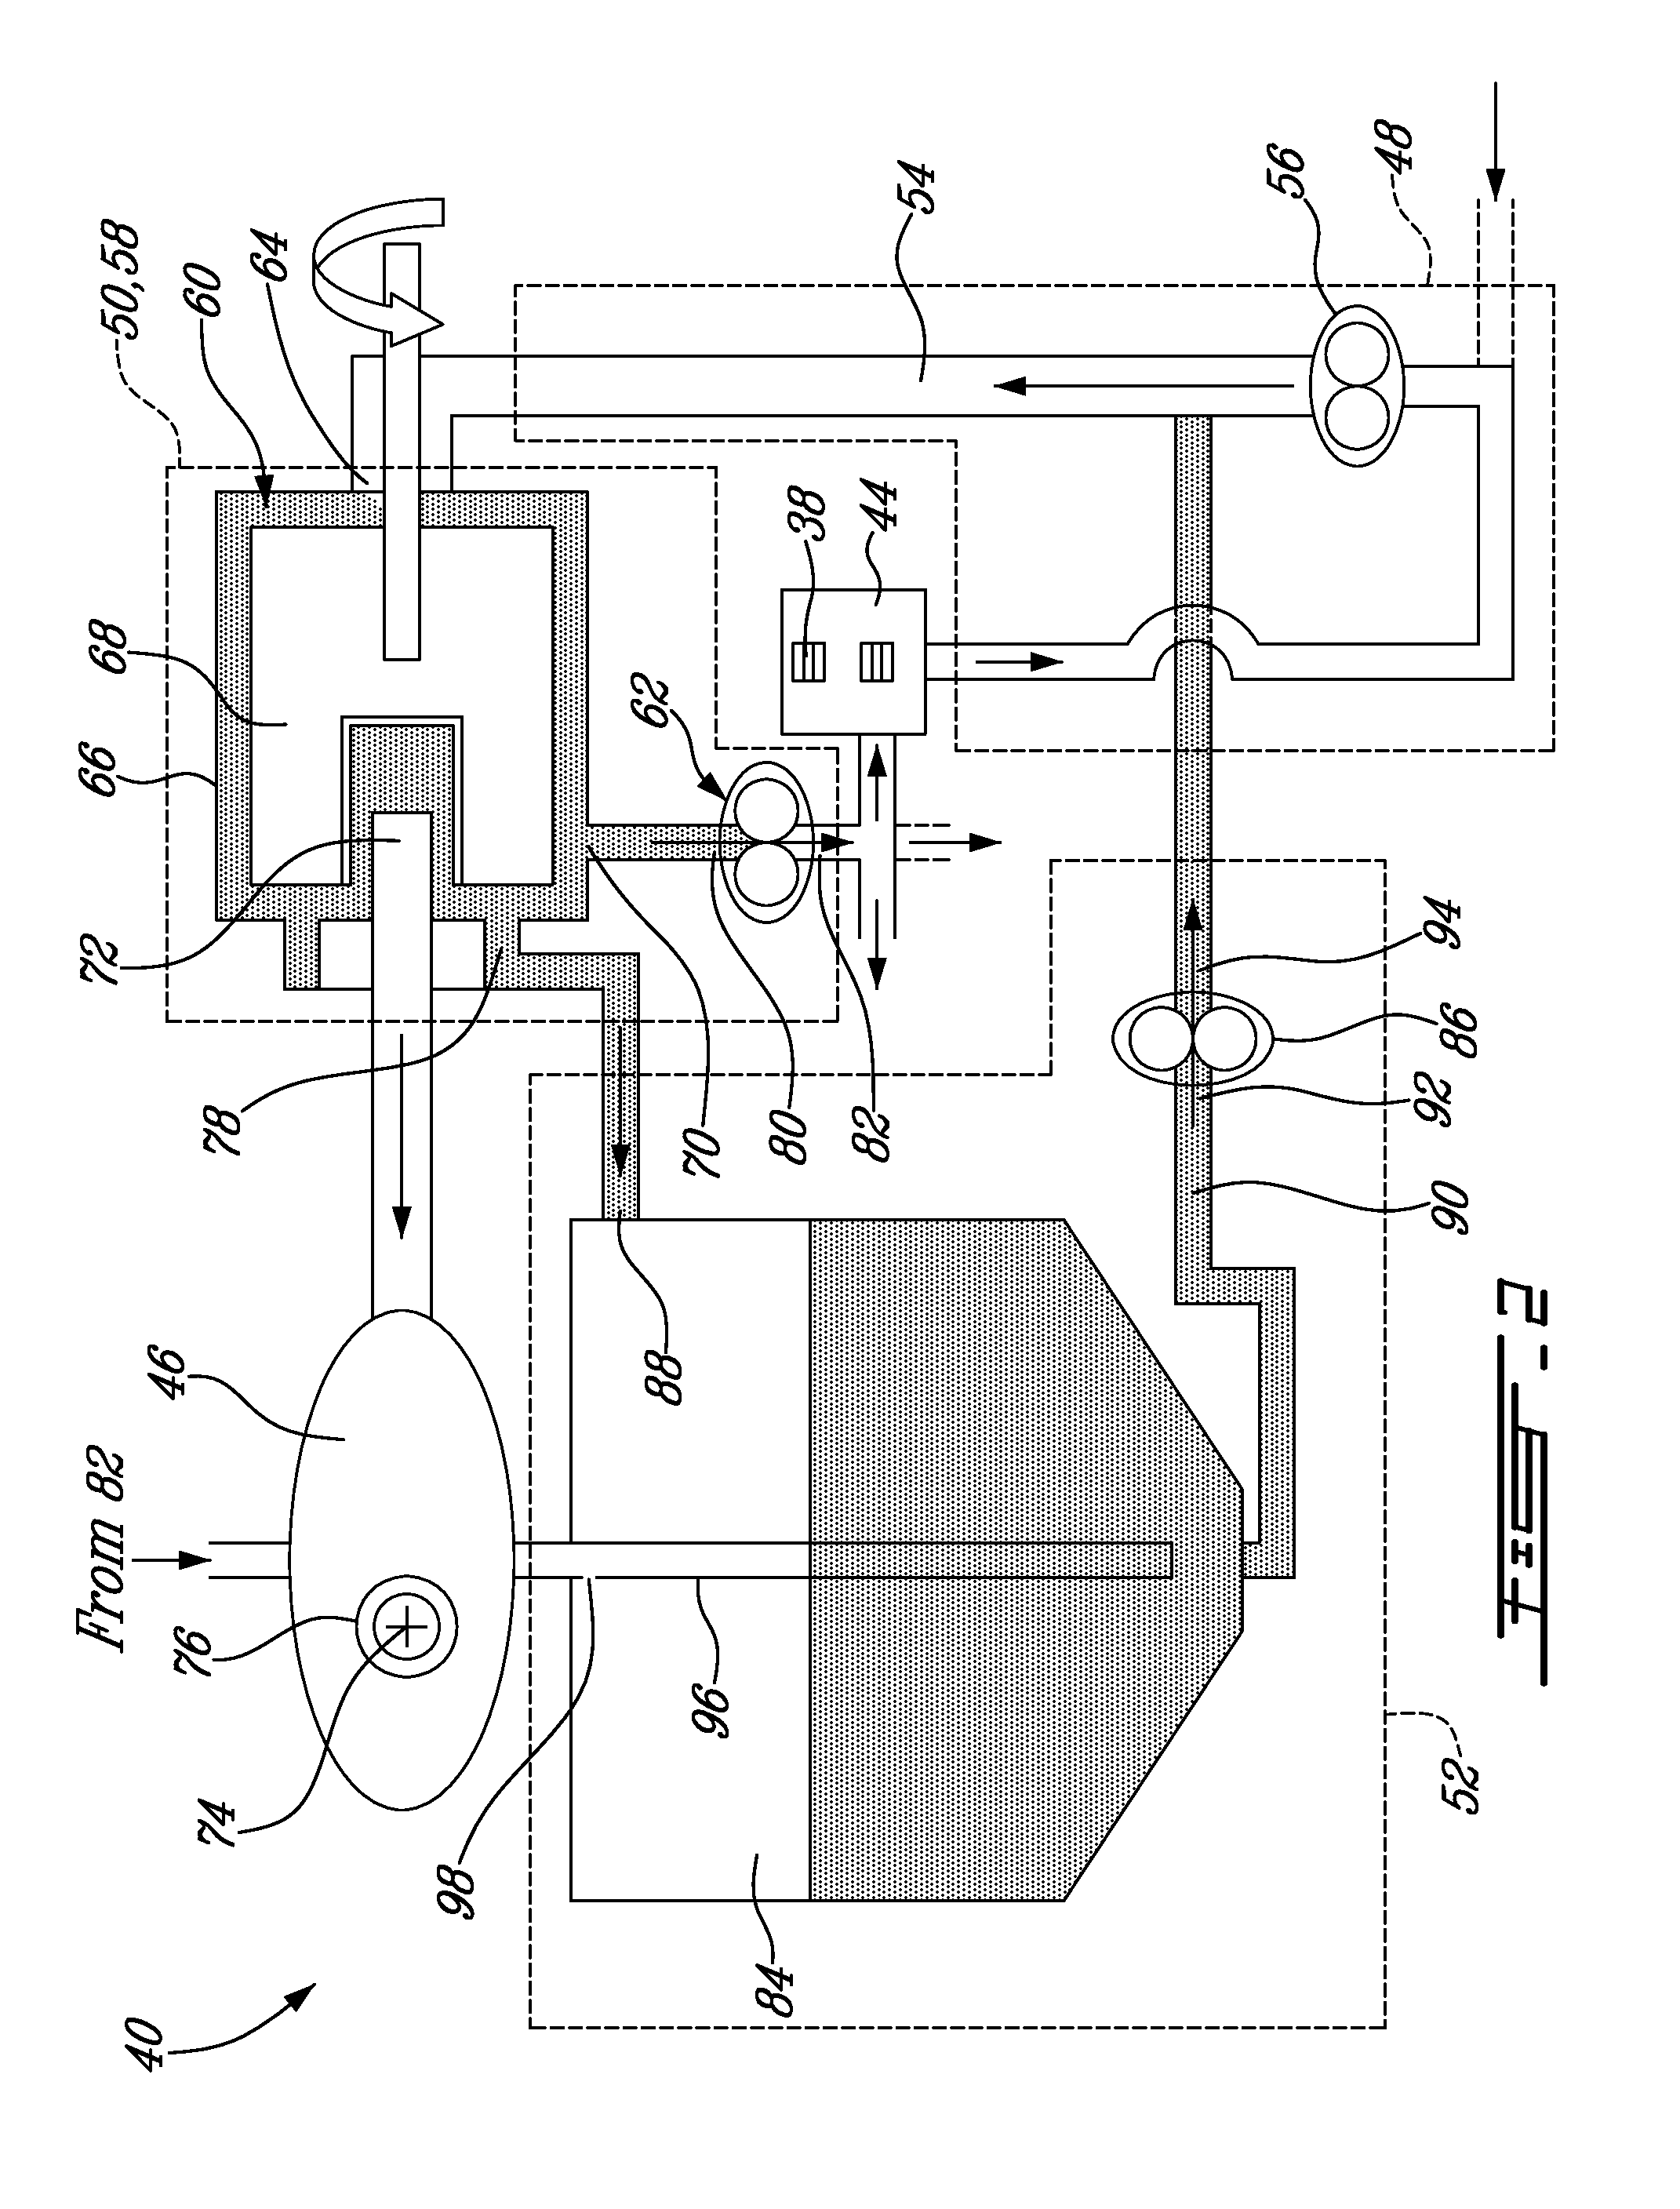 Oil supply system with main pump deaeration